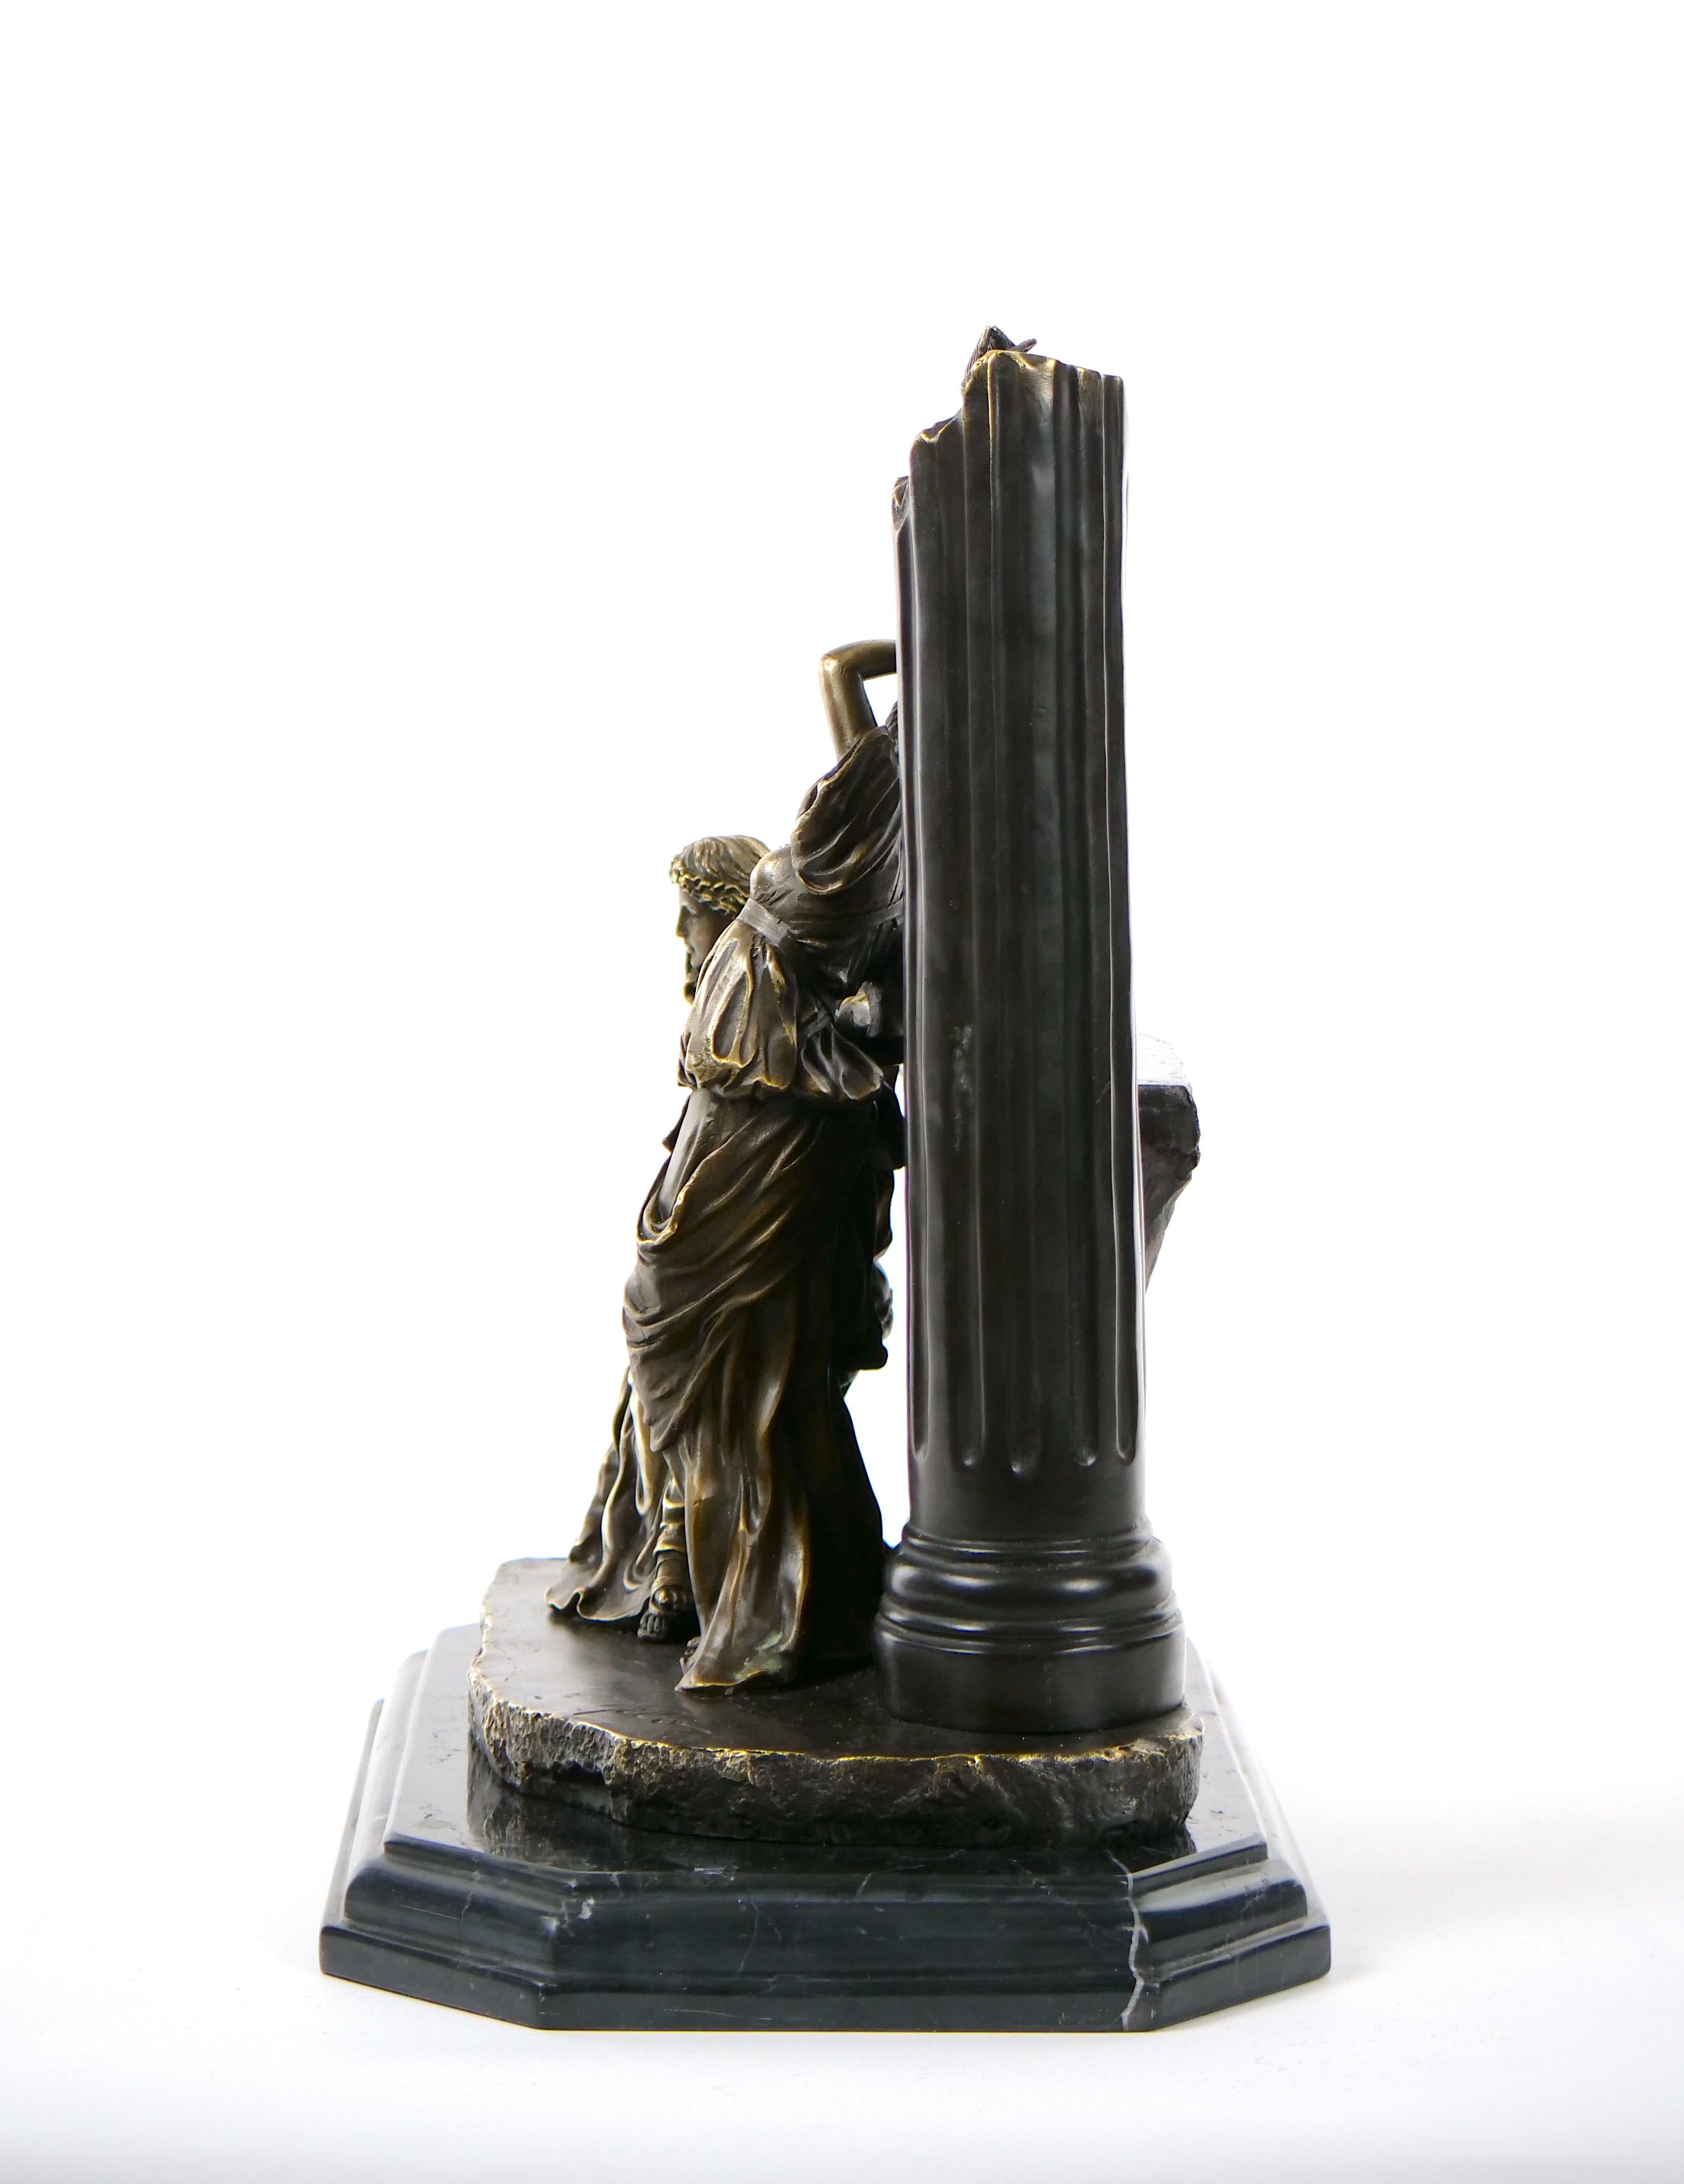 
Introducing a mesmerizing work of art, our gilt-patinated bronze sculpture with a black marble base, featuring neoclassical figures expertly crafted by the renowned artist Miguel Fernando Lopez, also known as Milo. This exquisite sculpture embodies